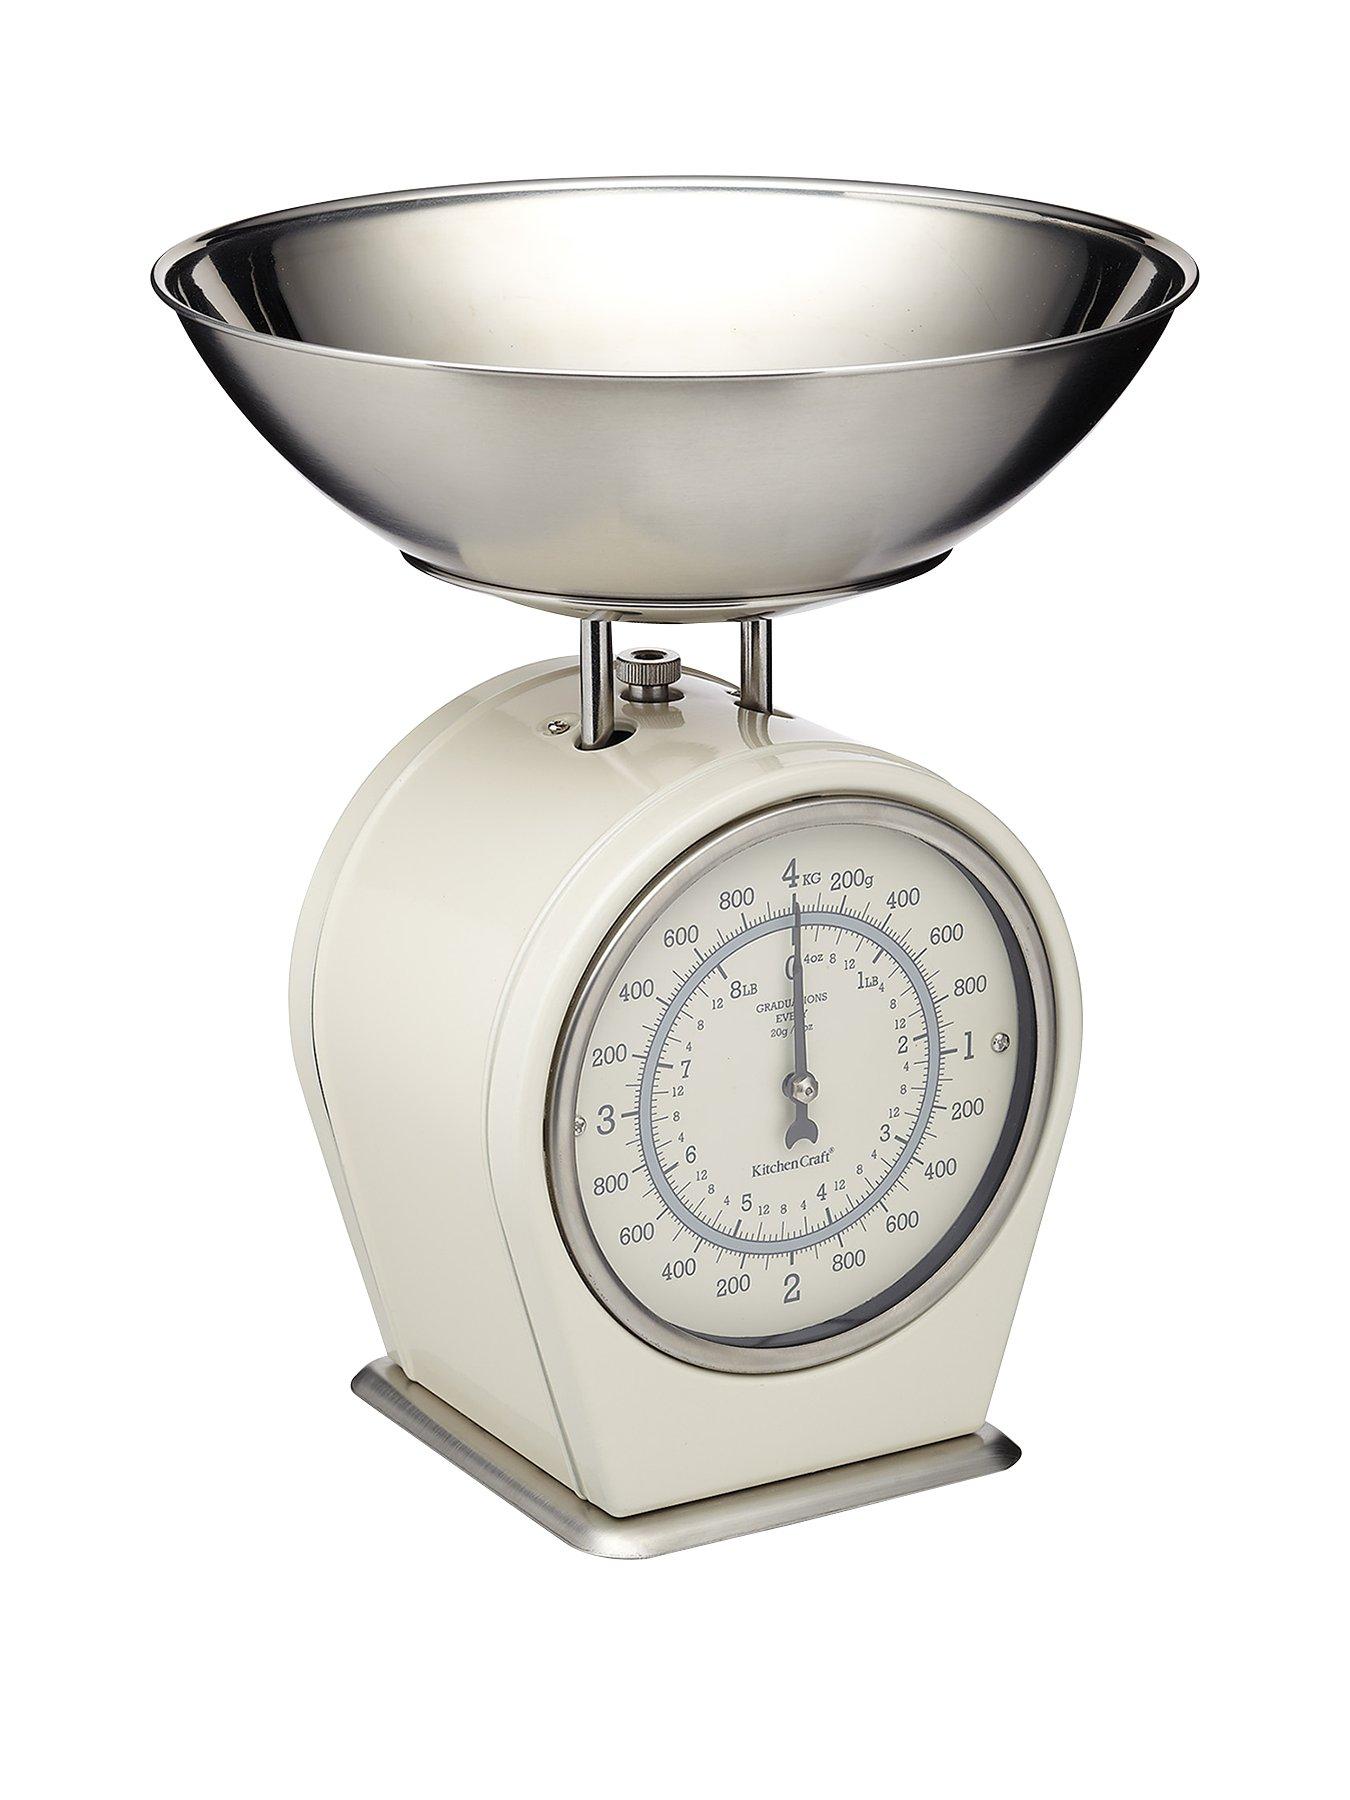 Details about   Traditional Mechanical Kitchen Scales 5kg Blue Grey Beige Stainless Steel Bowl 